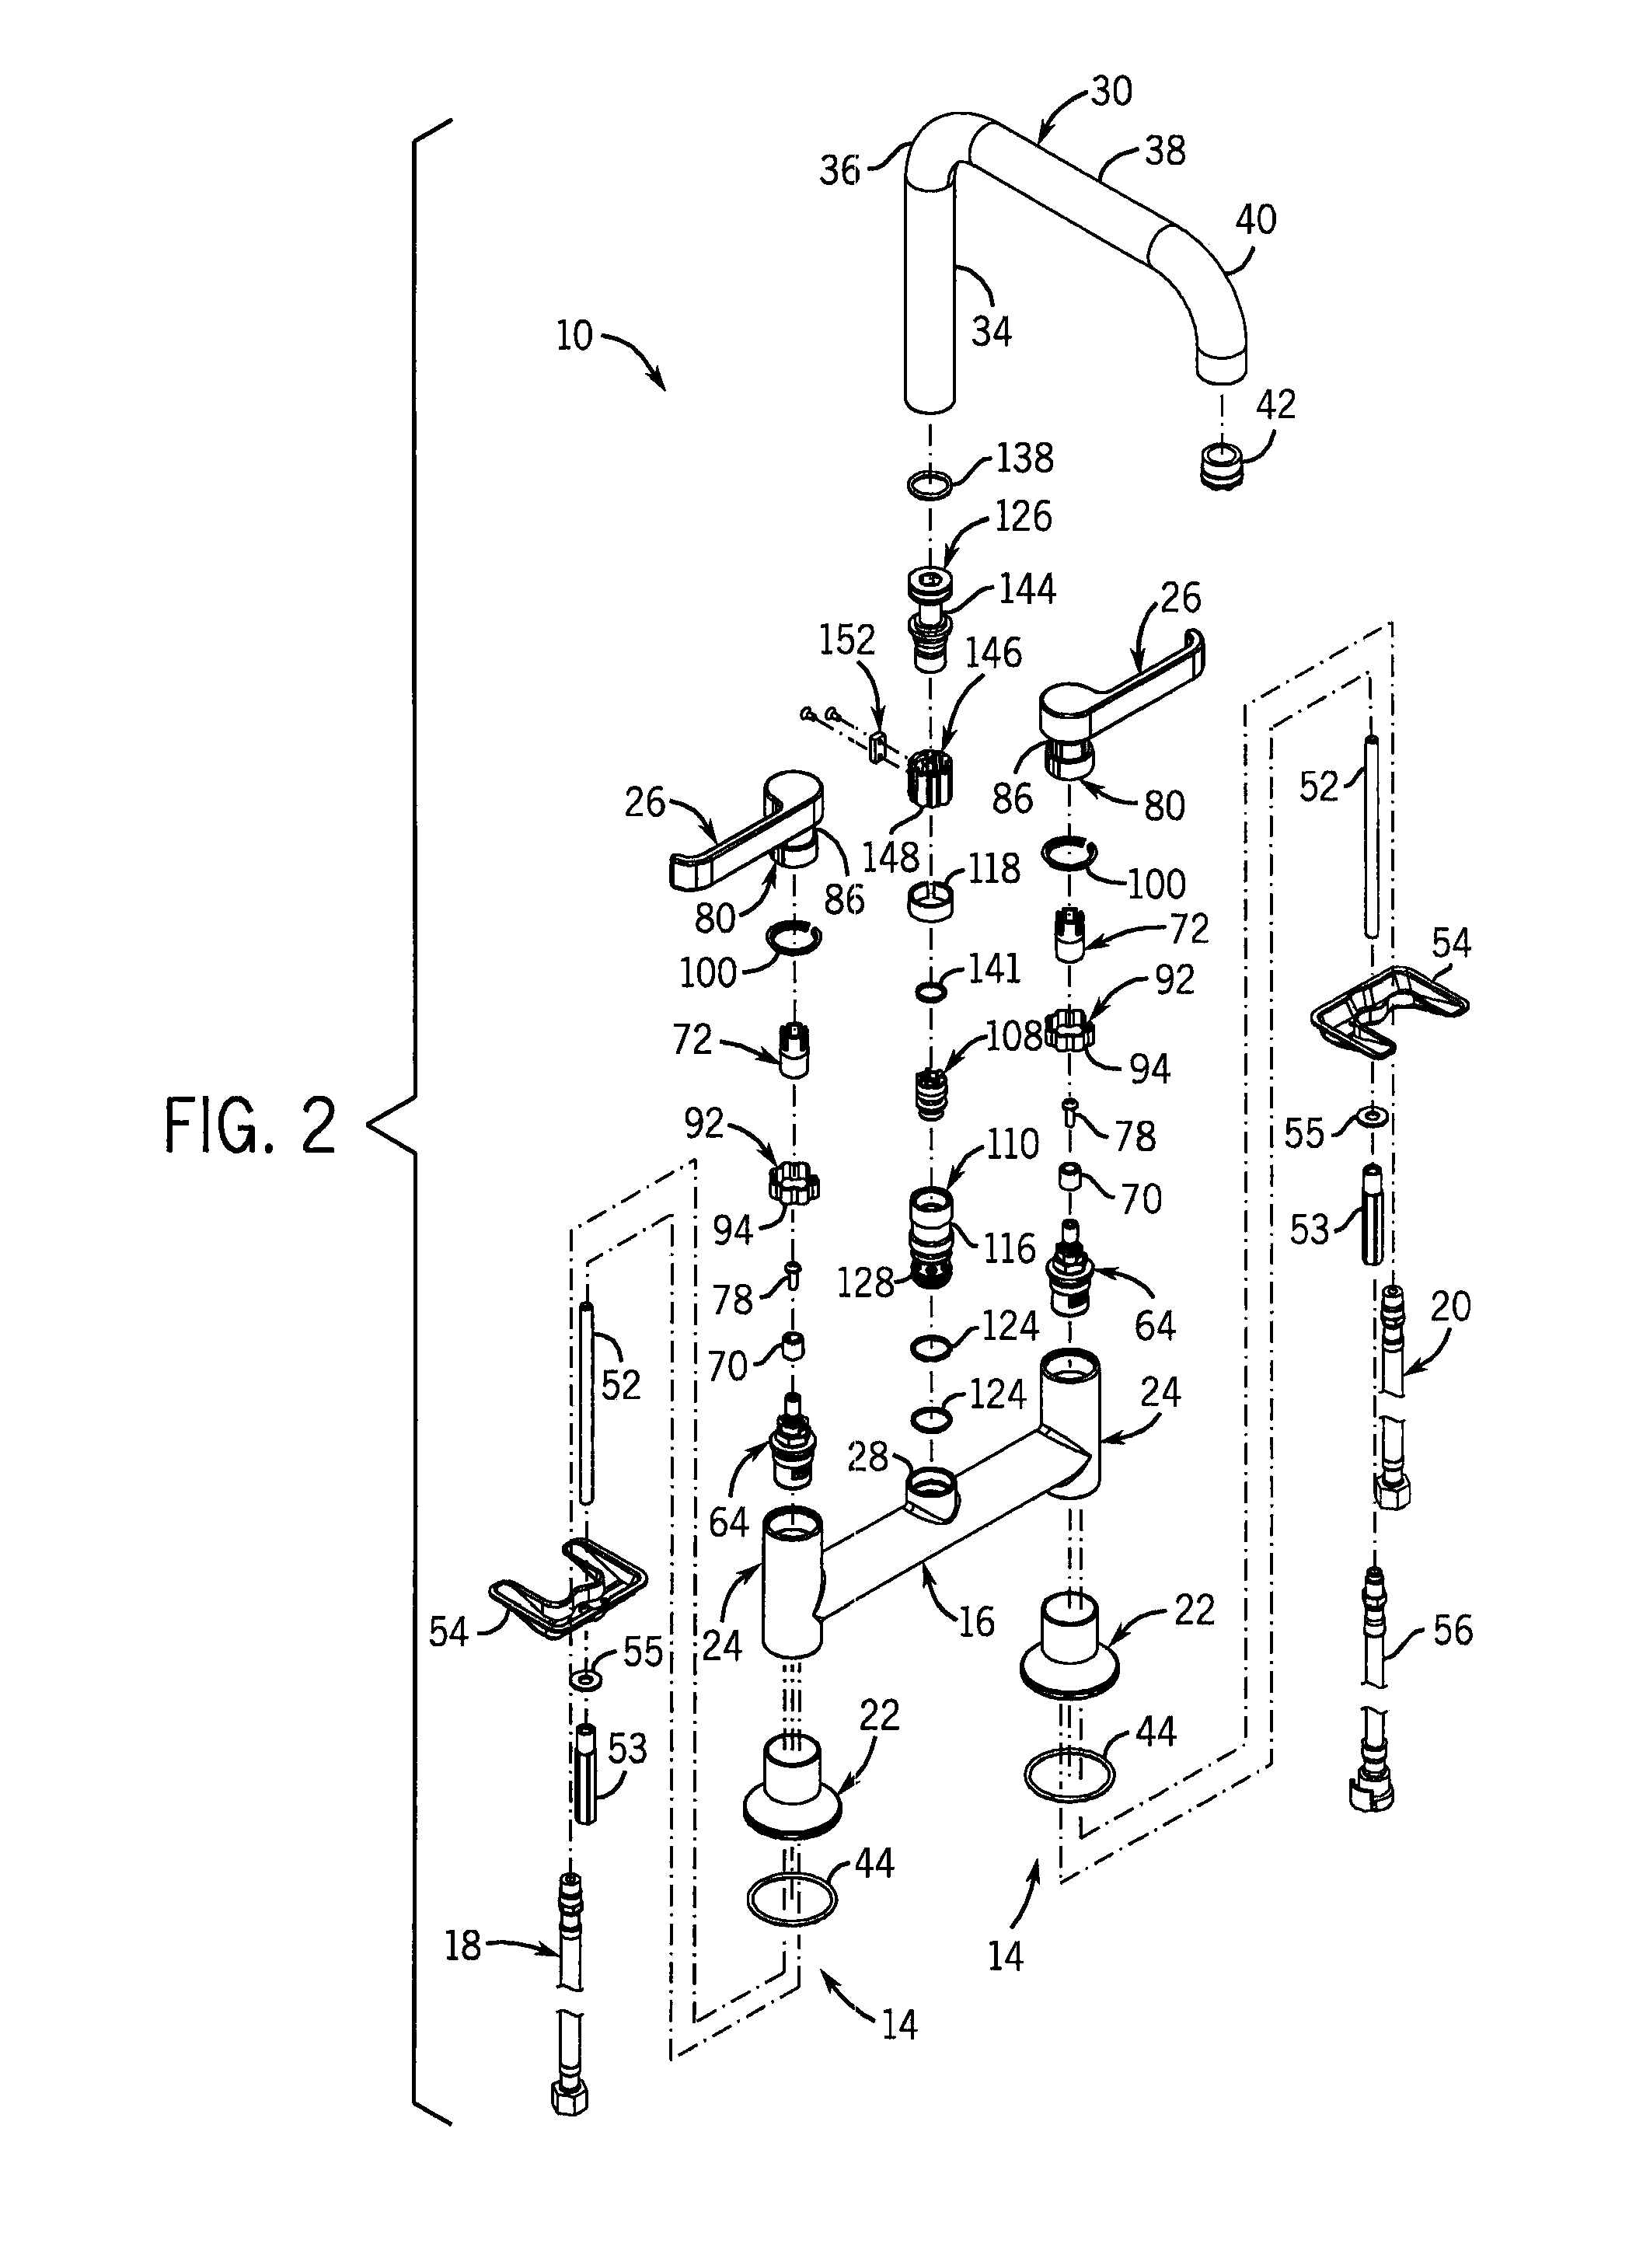 Coupling assembly for plumbing fitting